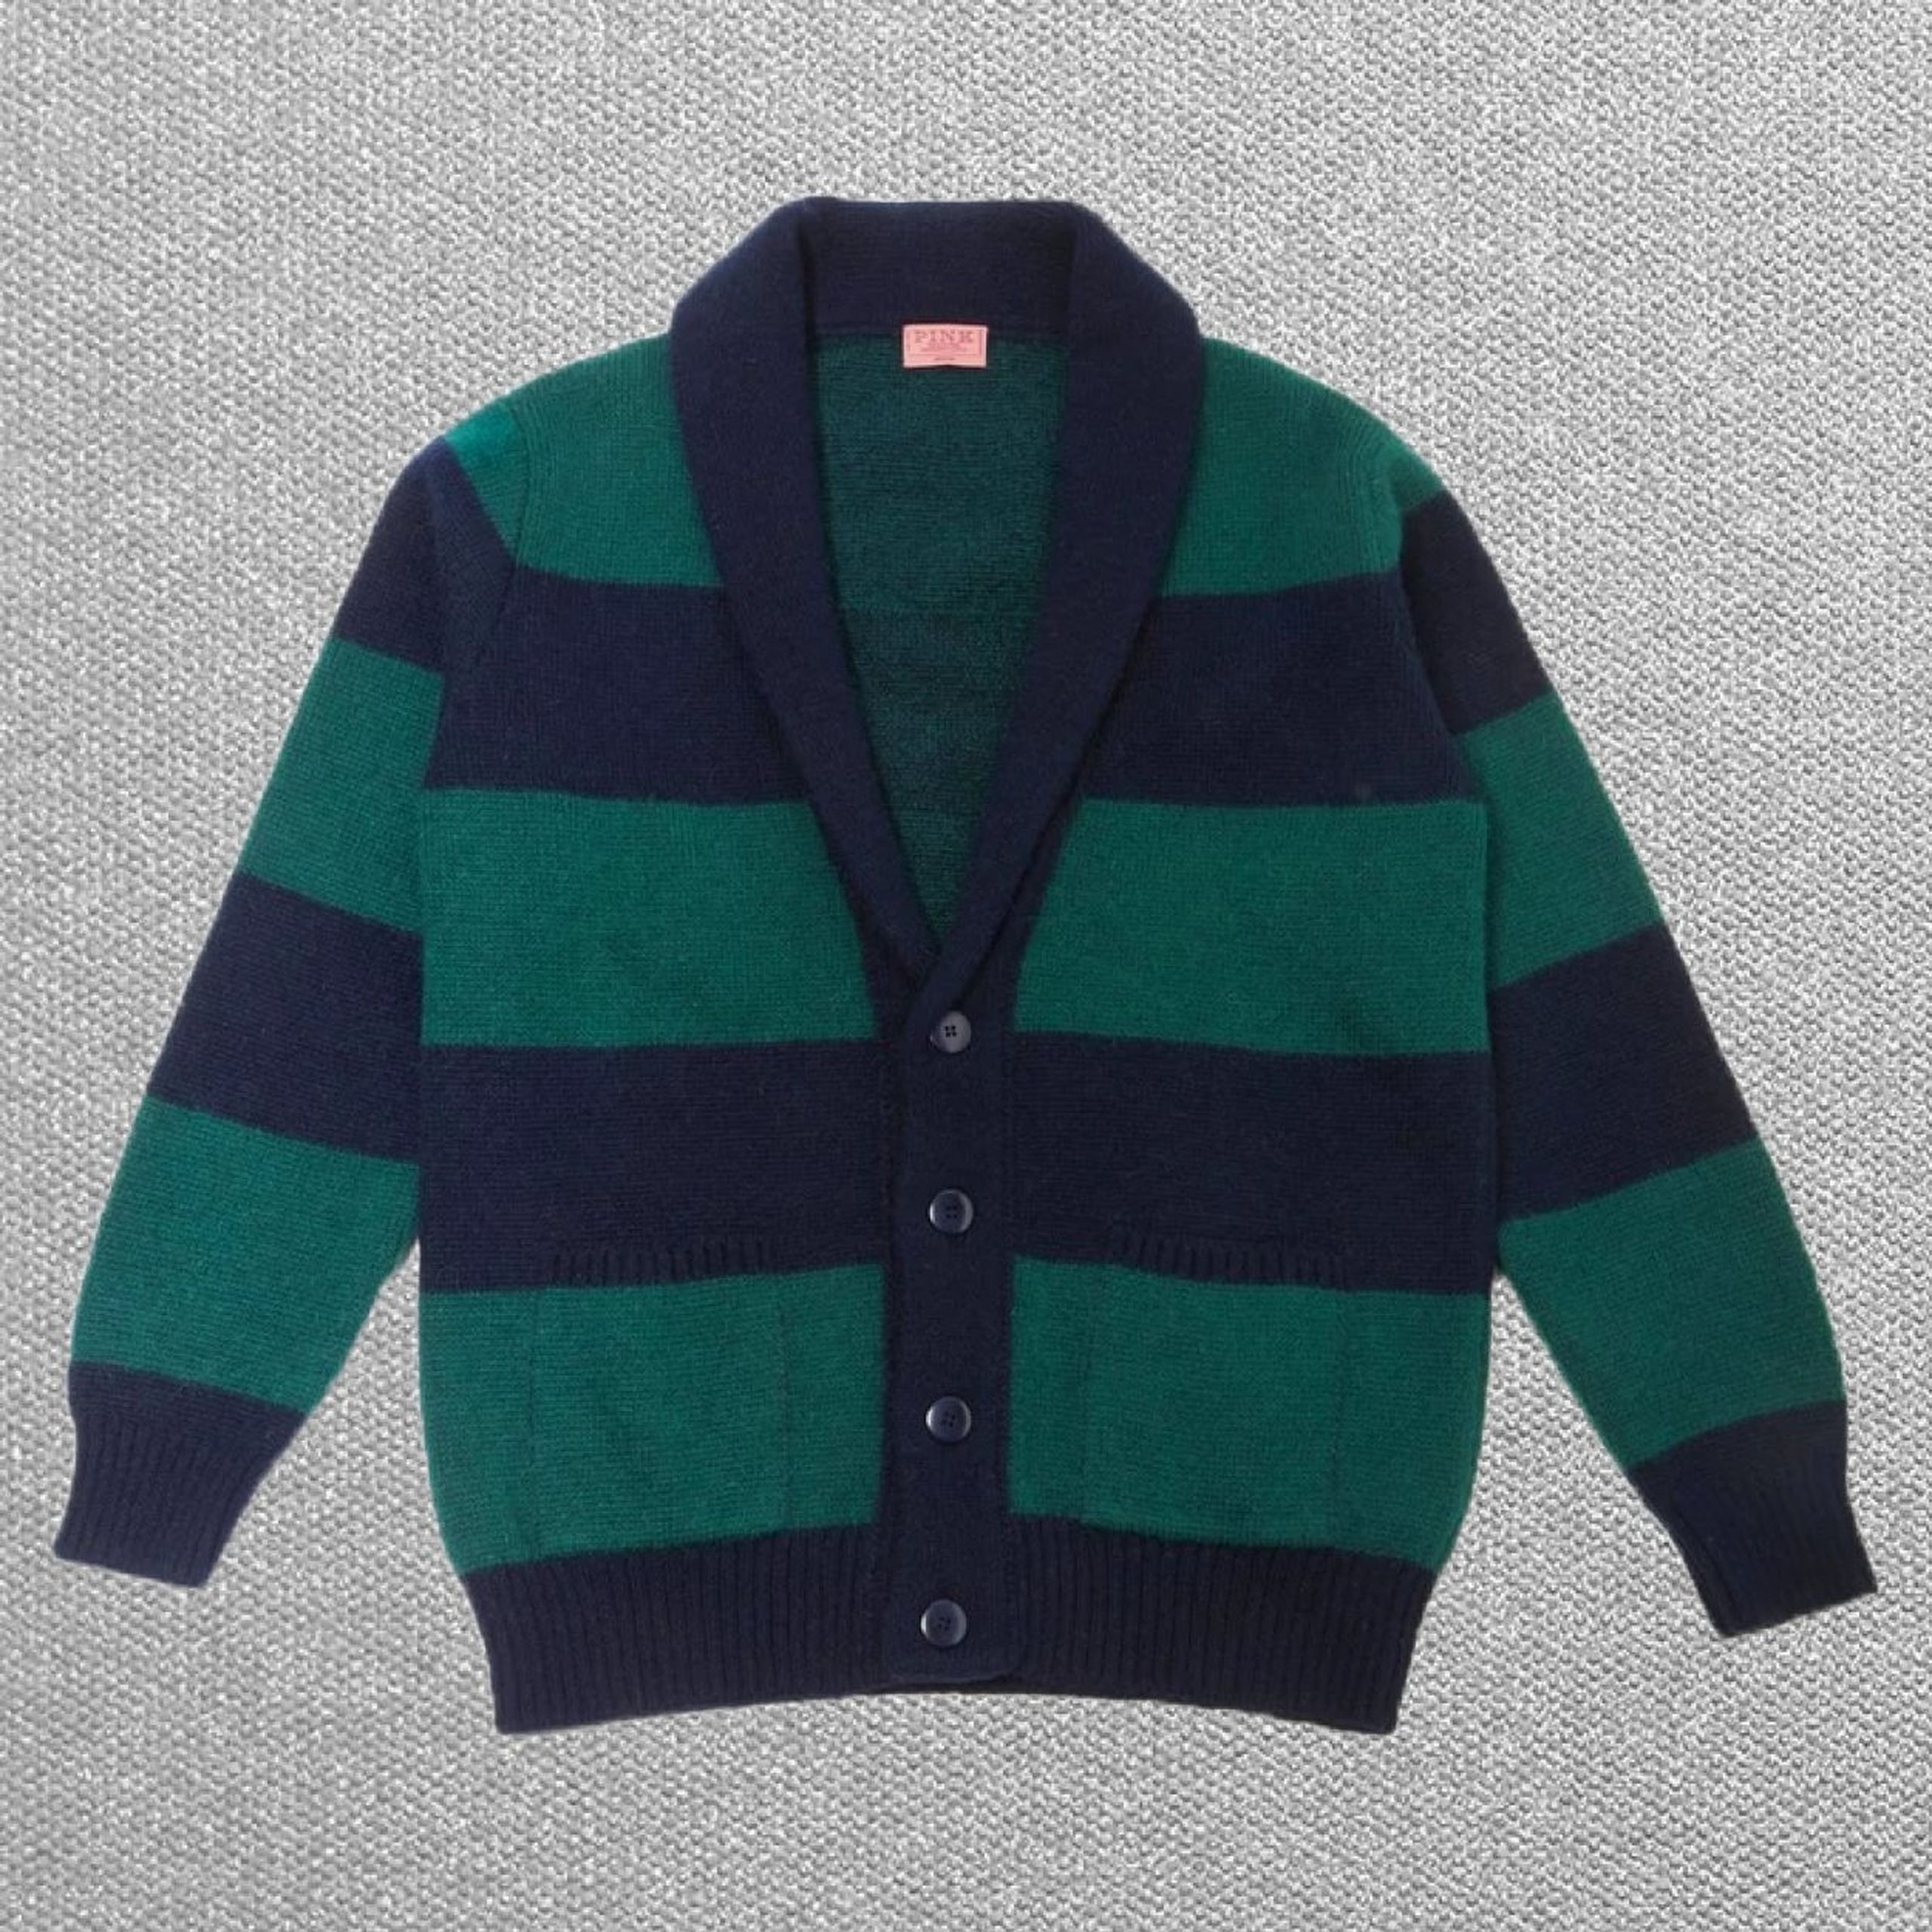 Mohair Green and Navy Knitwear